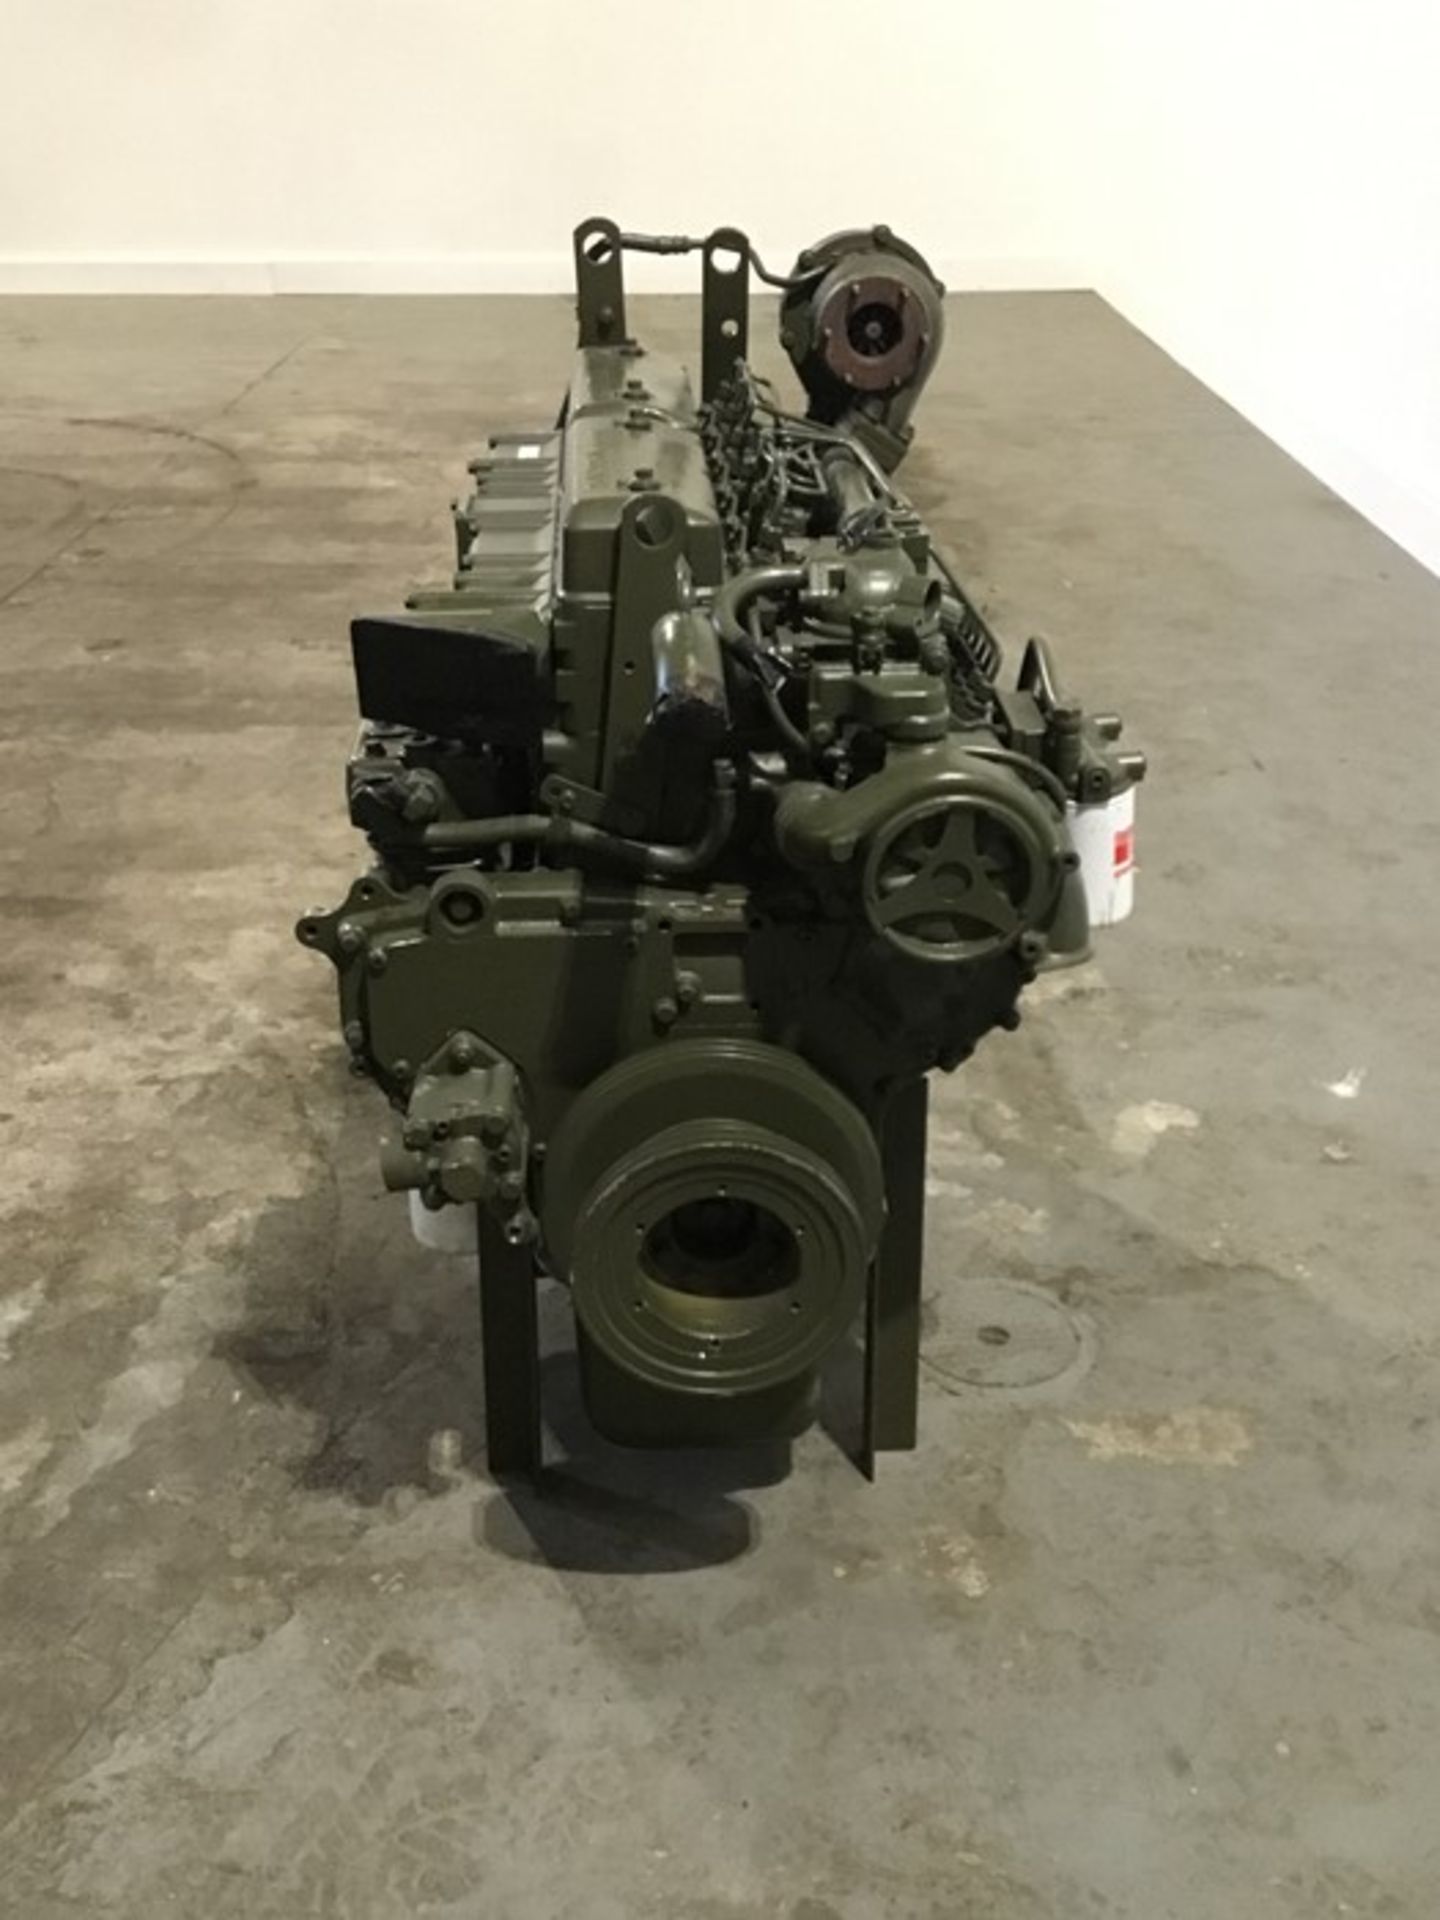 Volvo D6 Diesel Engine: Volvo D6 6Cyl Turbo low hours - Image 3 of 18